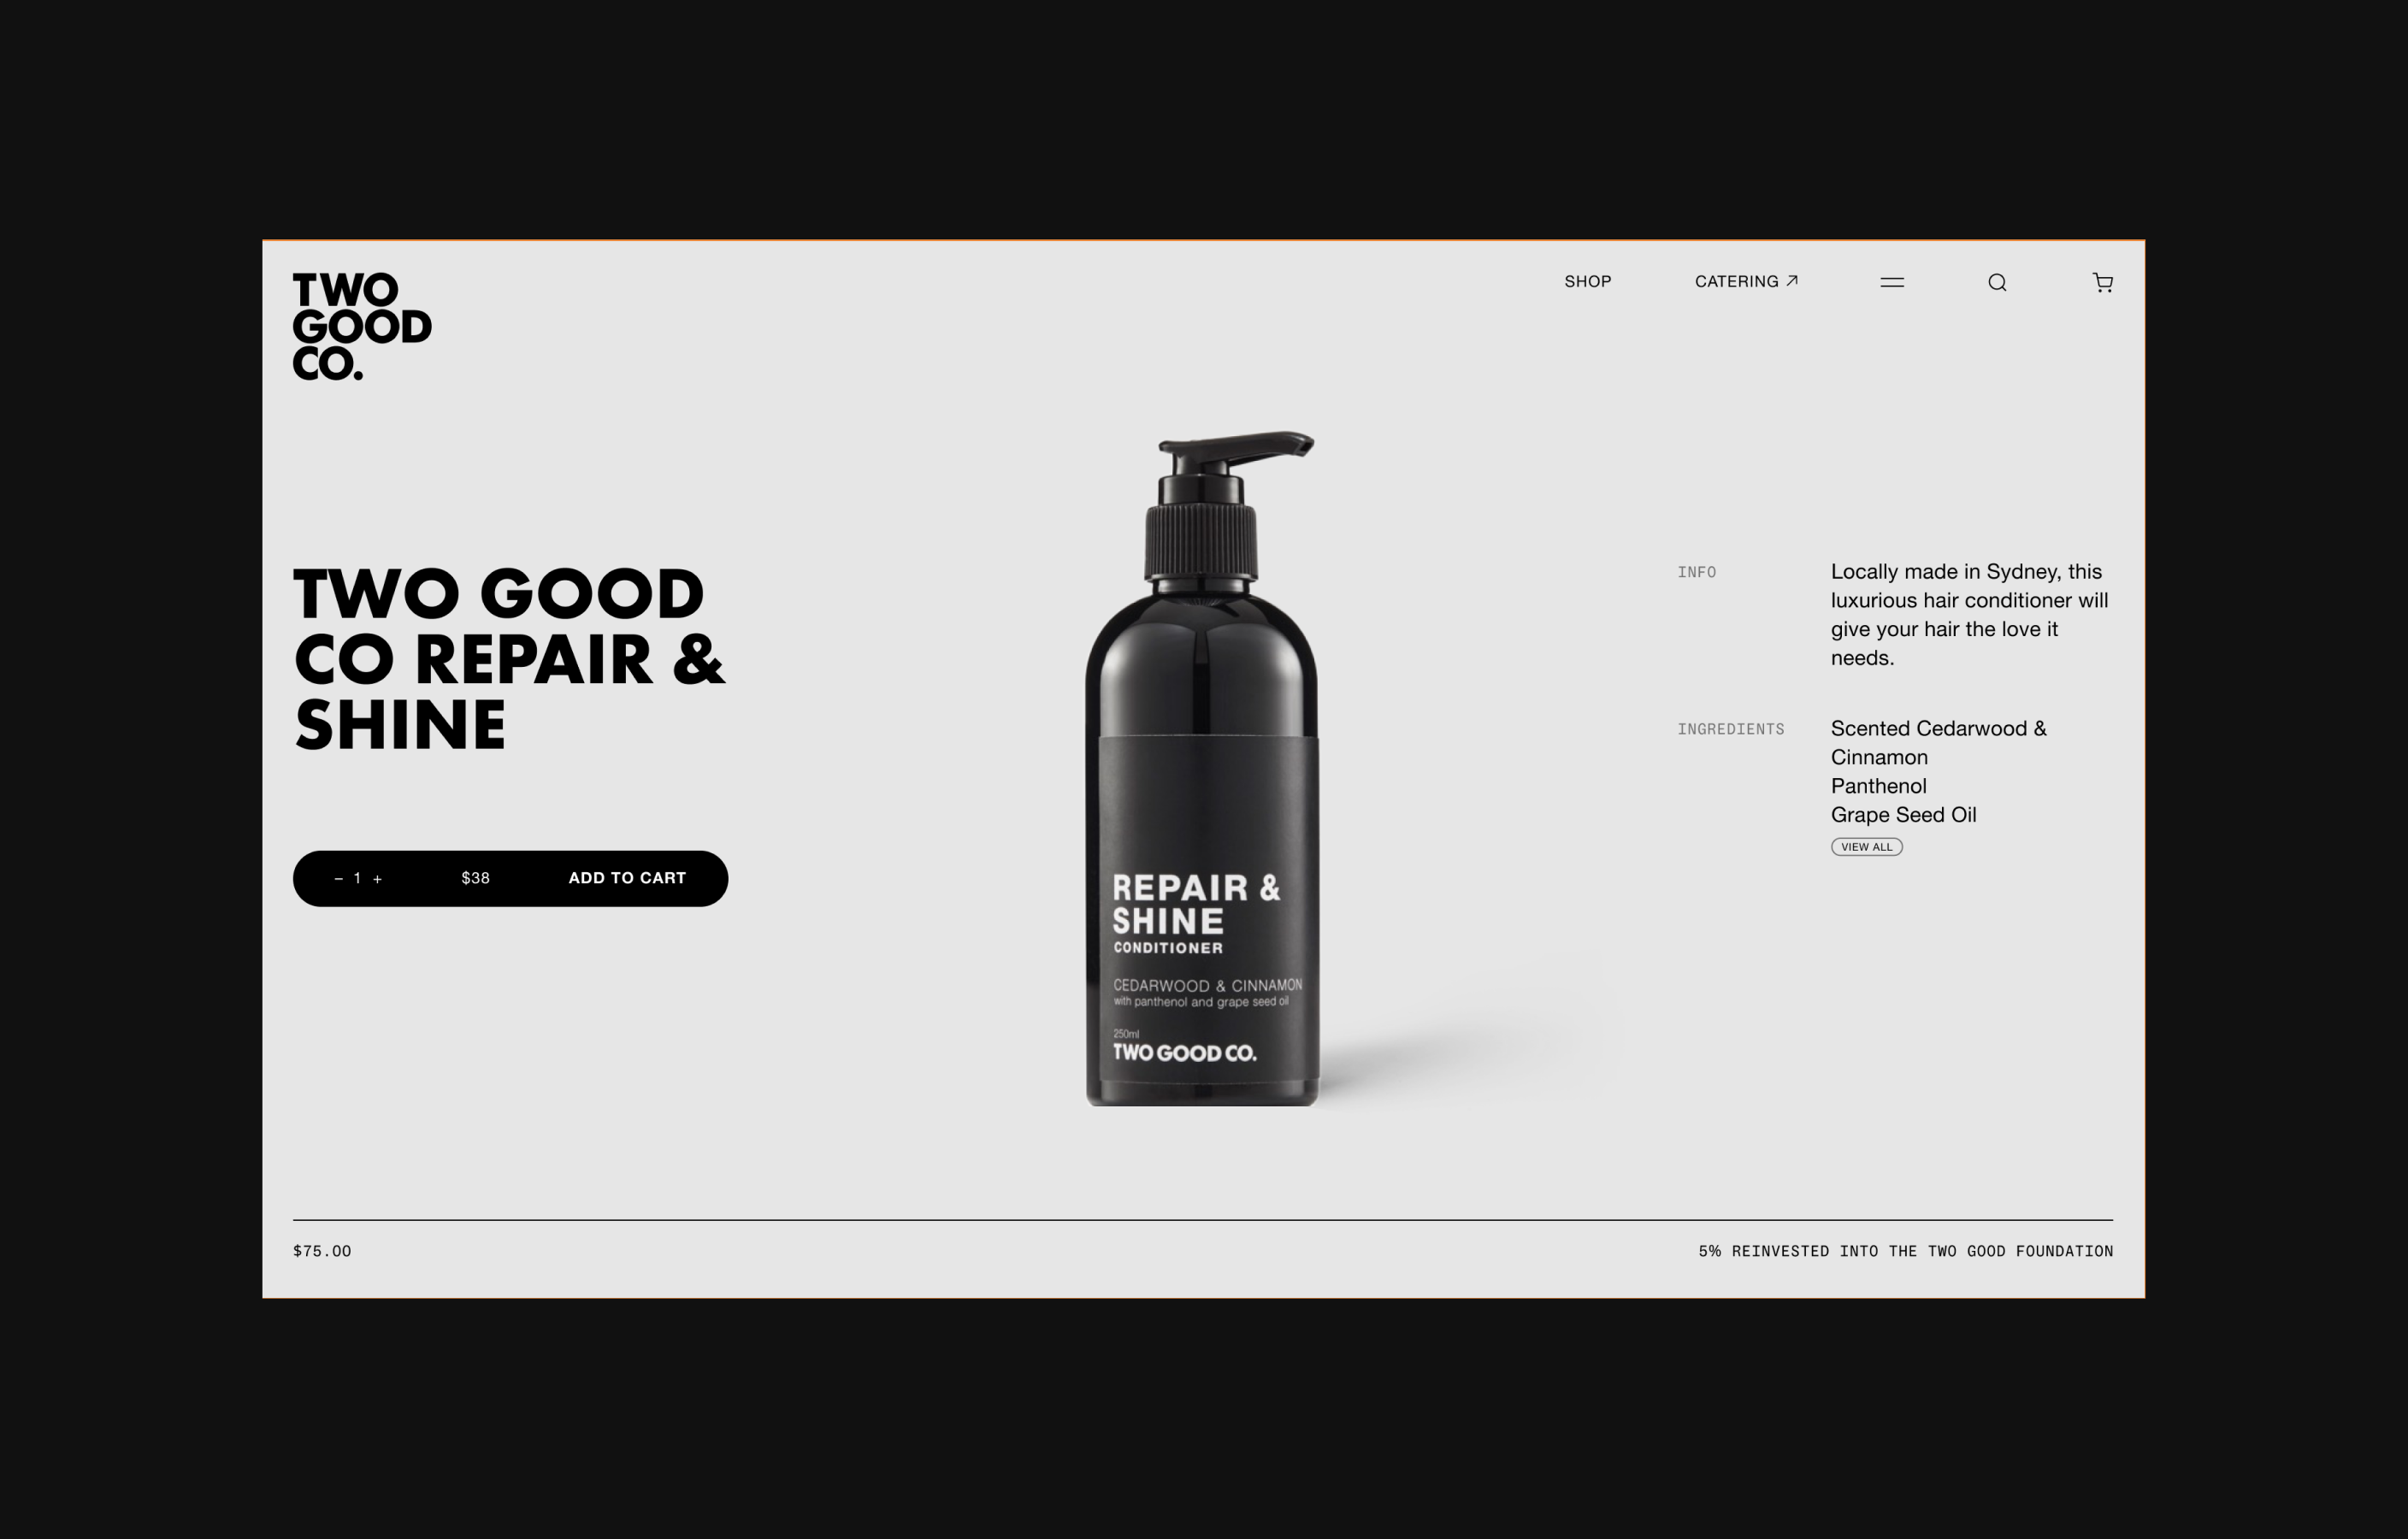 Two Good new product page for their shampoo